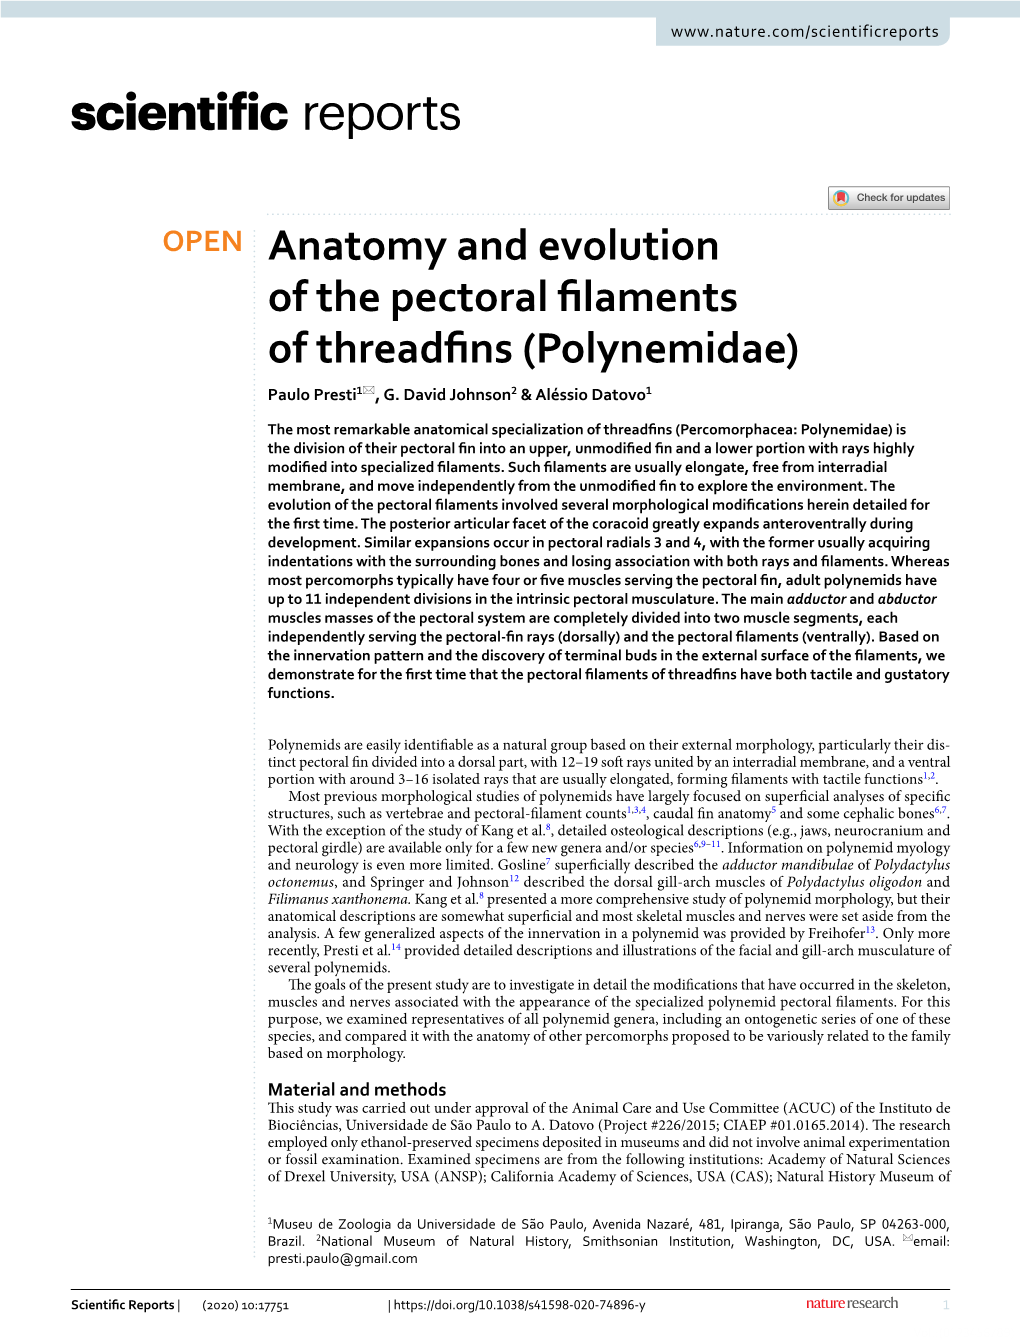 Anatomy and Evolution of the Pectoral Filaments of Threadfins (Polynemidae)